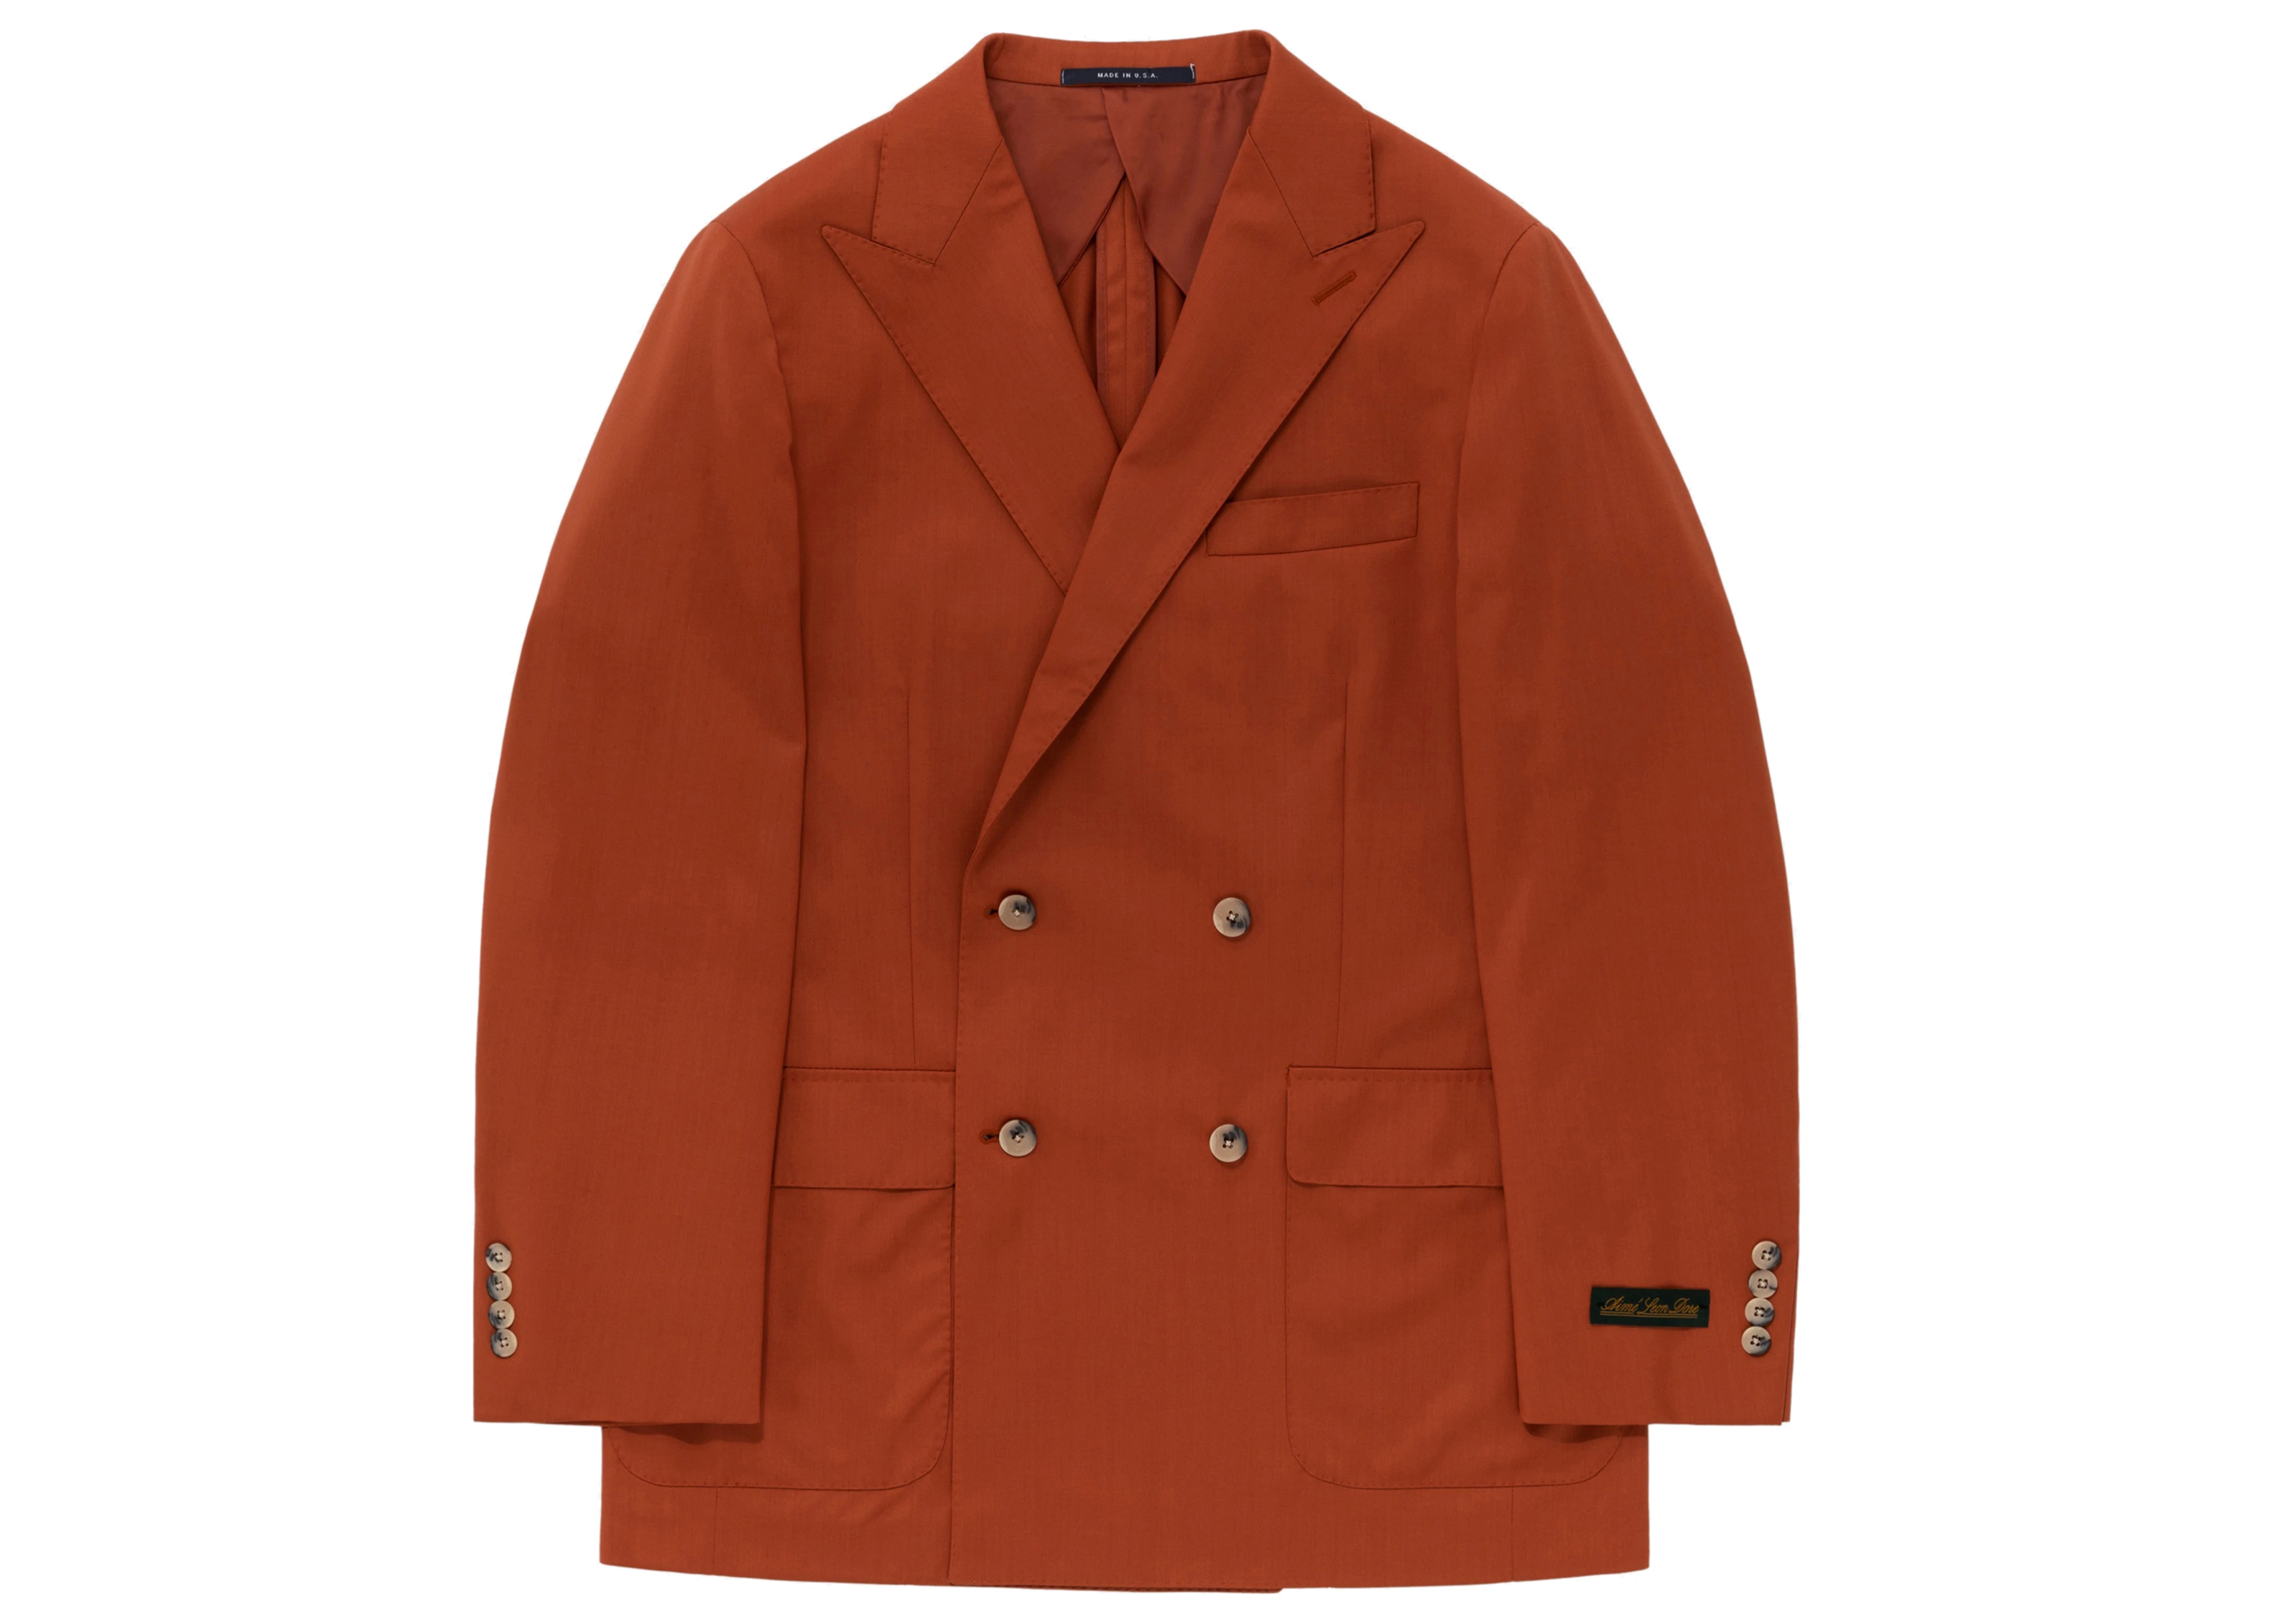 Aime Leon Dore Double Breasted Tropical Wool Suit Jacket Orange